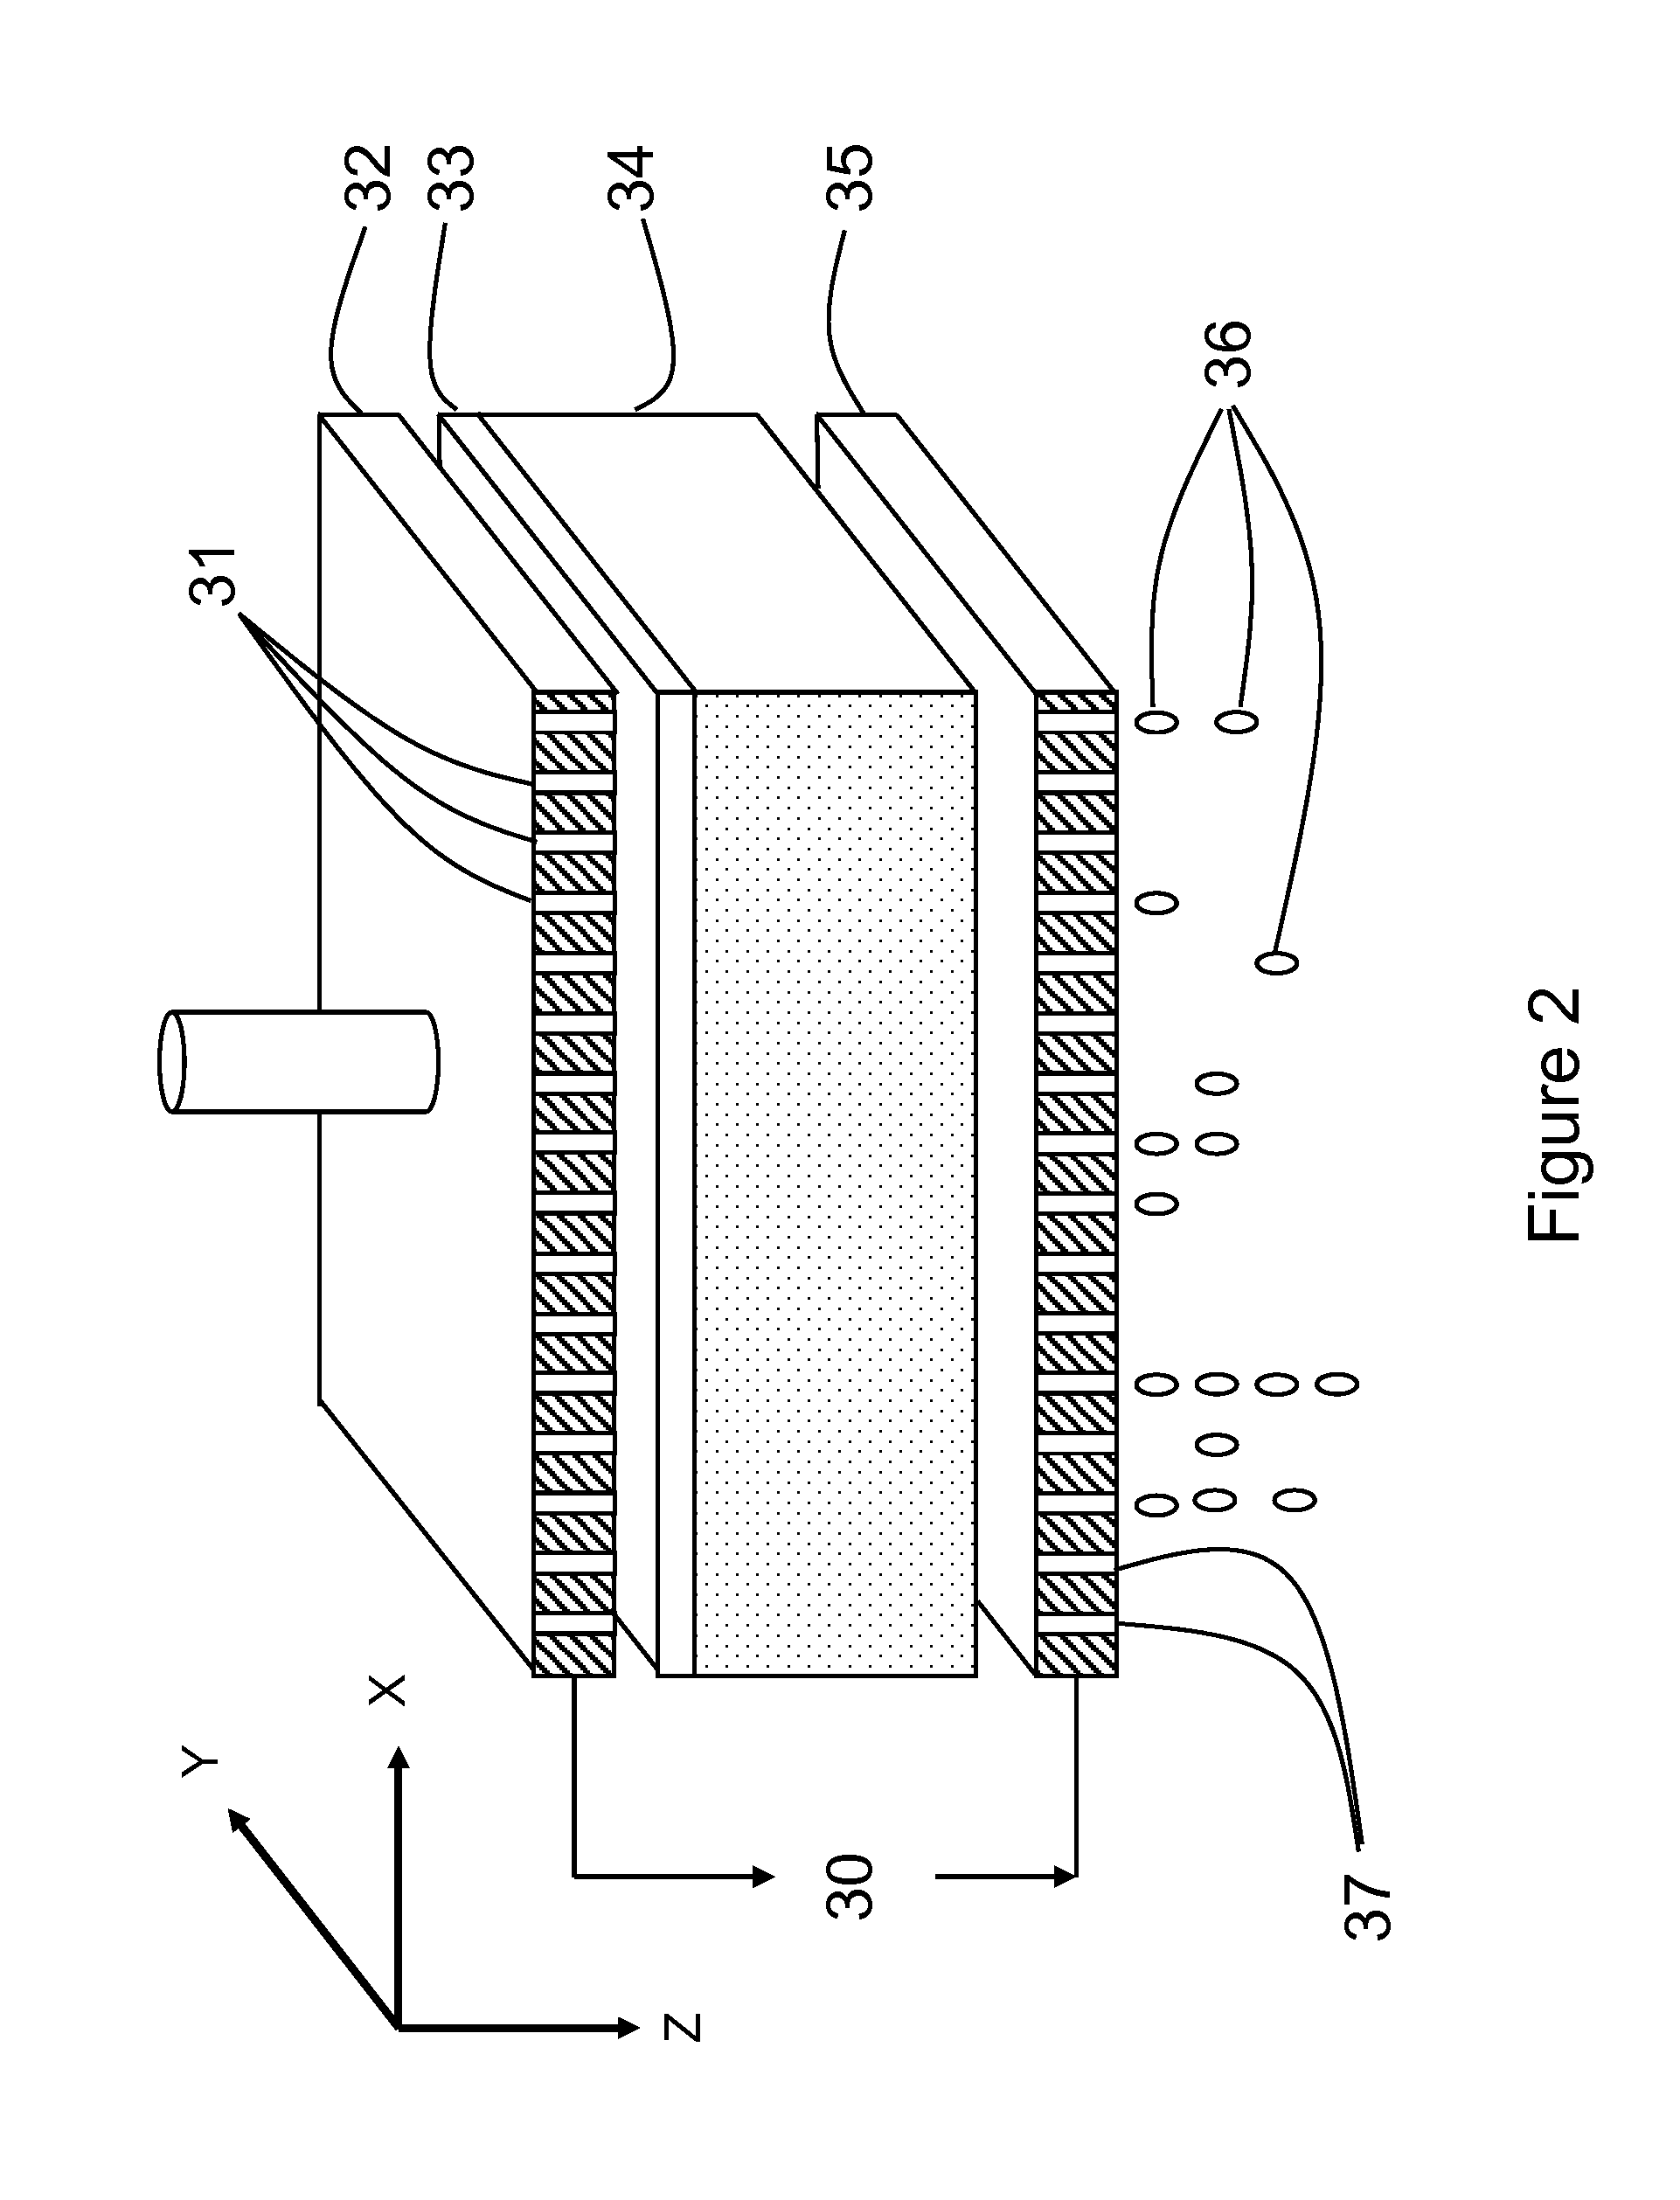 Method and apparatus for increasing the efficiency of electro-dewatering